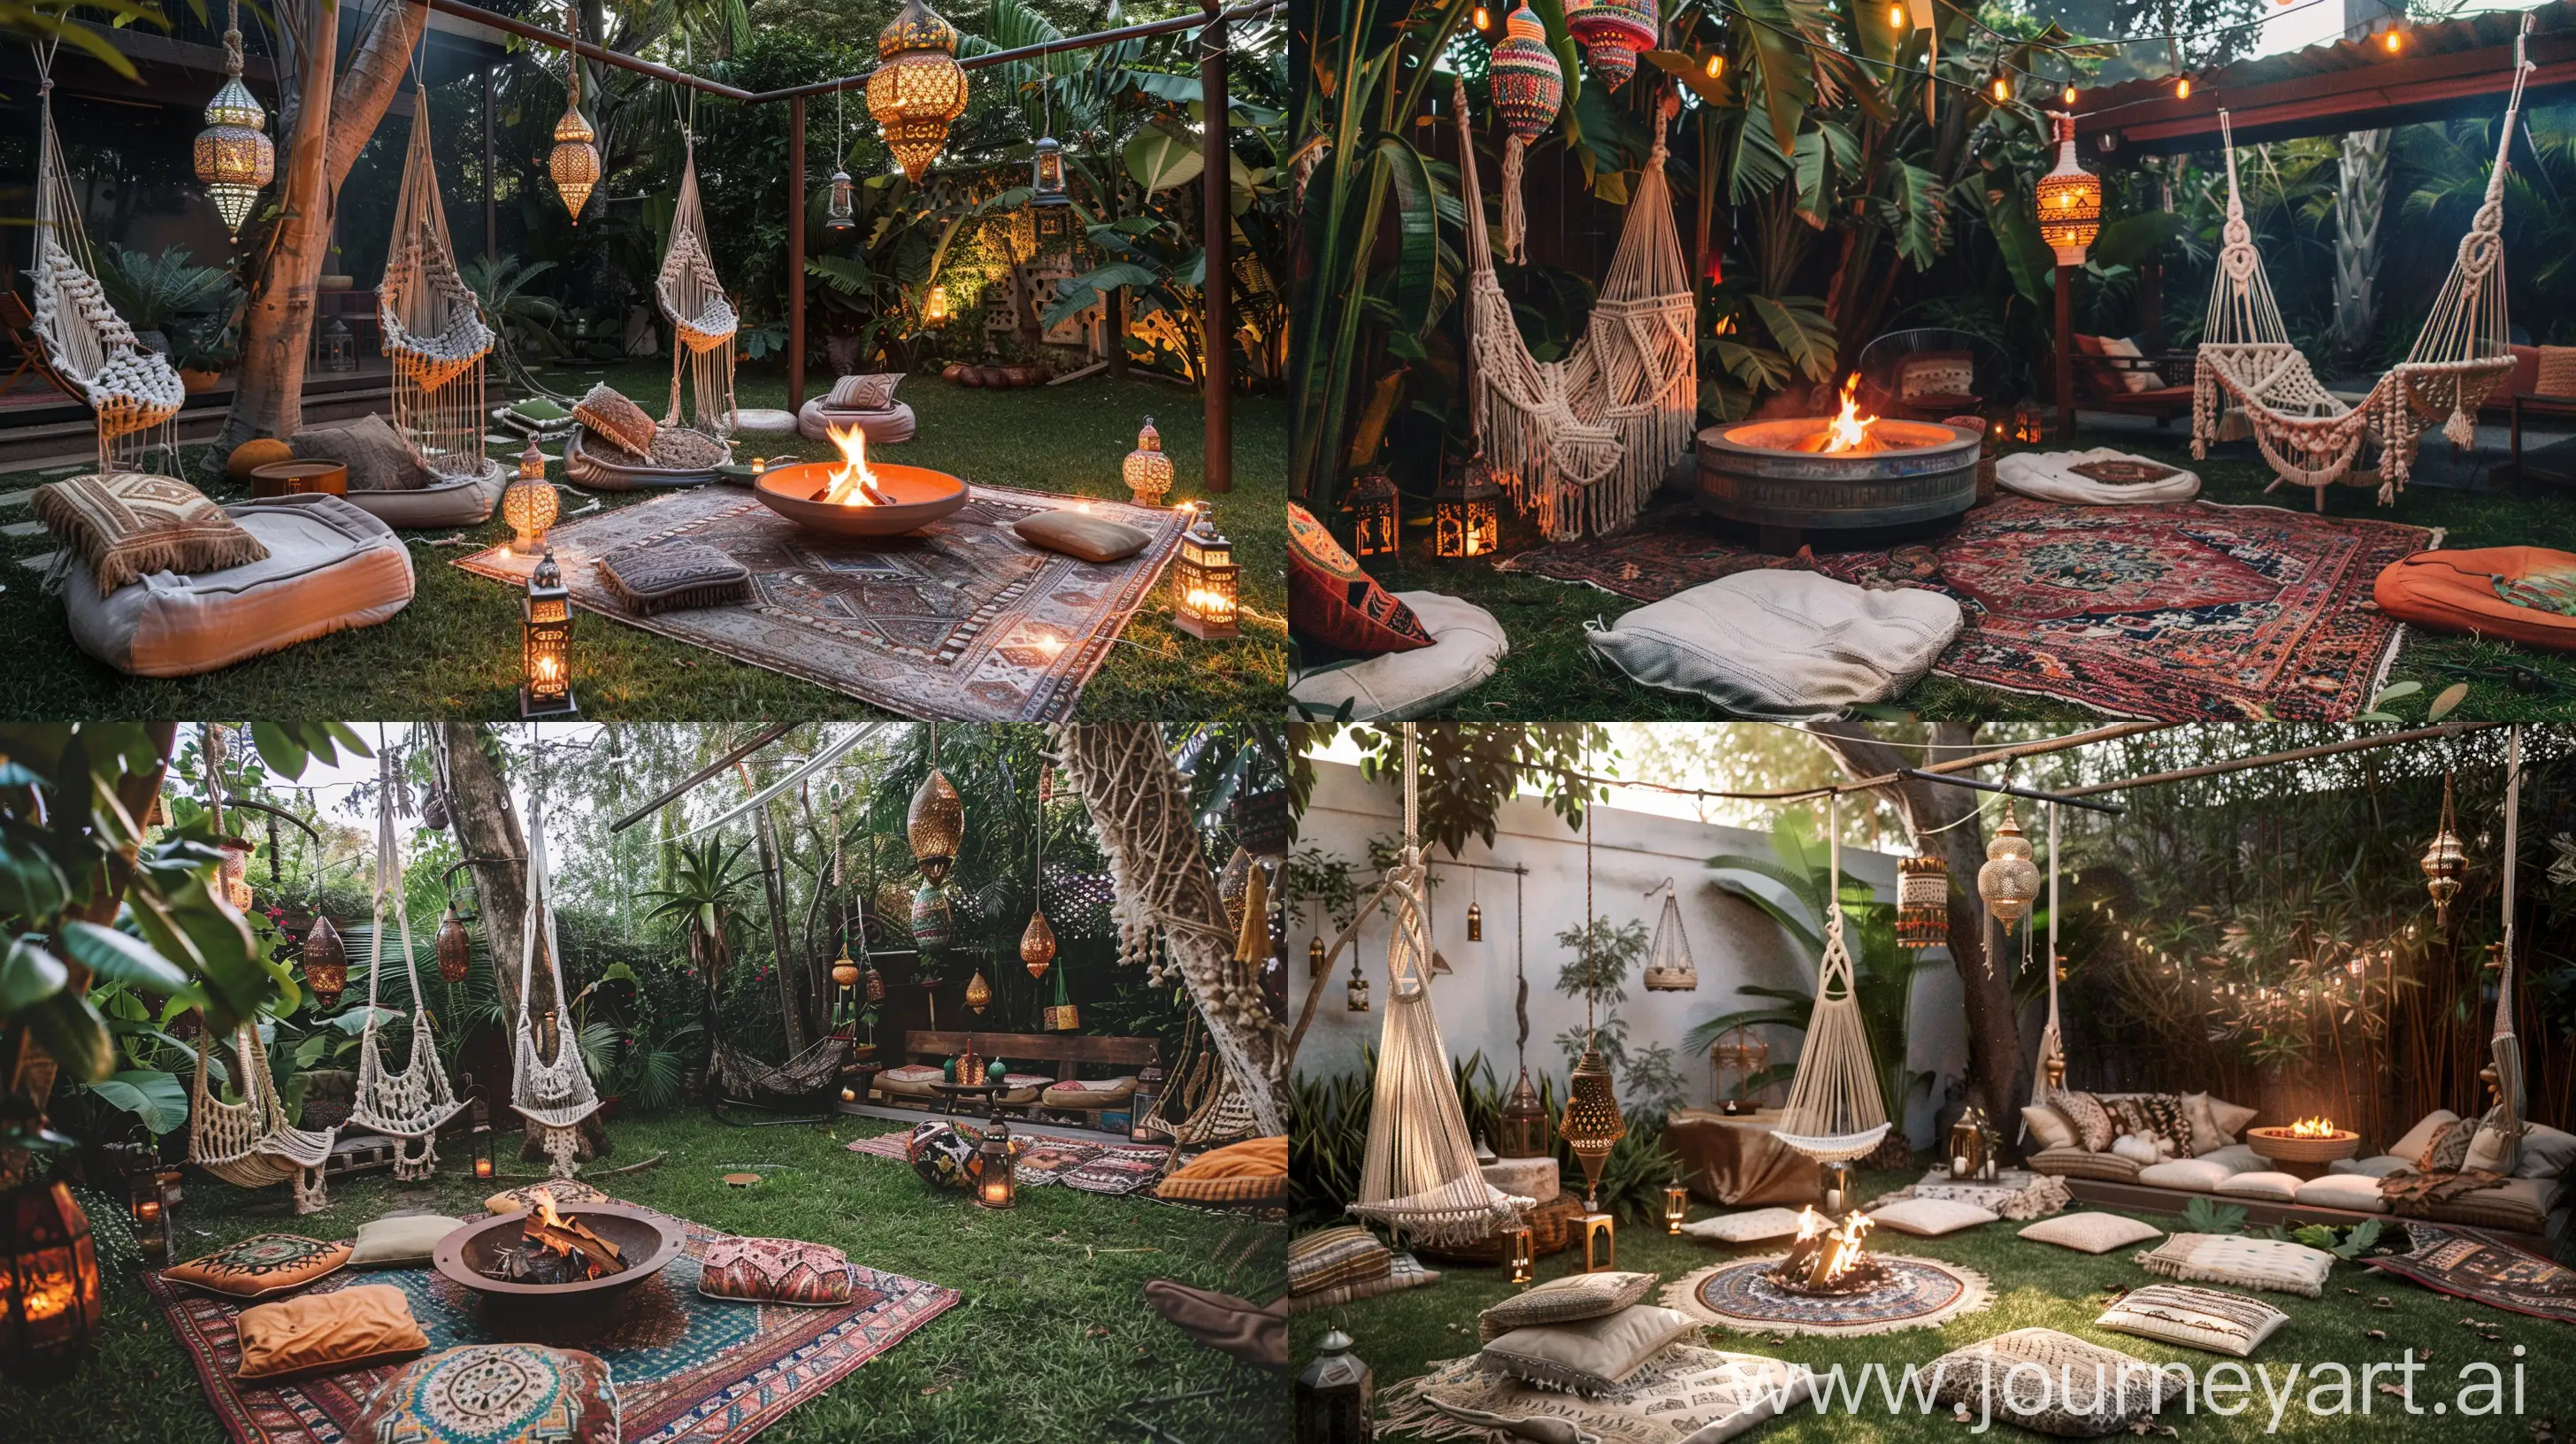 Bohemian Paradise: Backyard with Hanging Macrame Chairs, Moroccan Lanterns, and a Fire Pit Surrounded by Floor Cushions. --ar 16:9